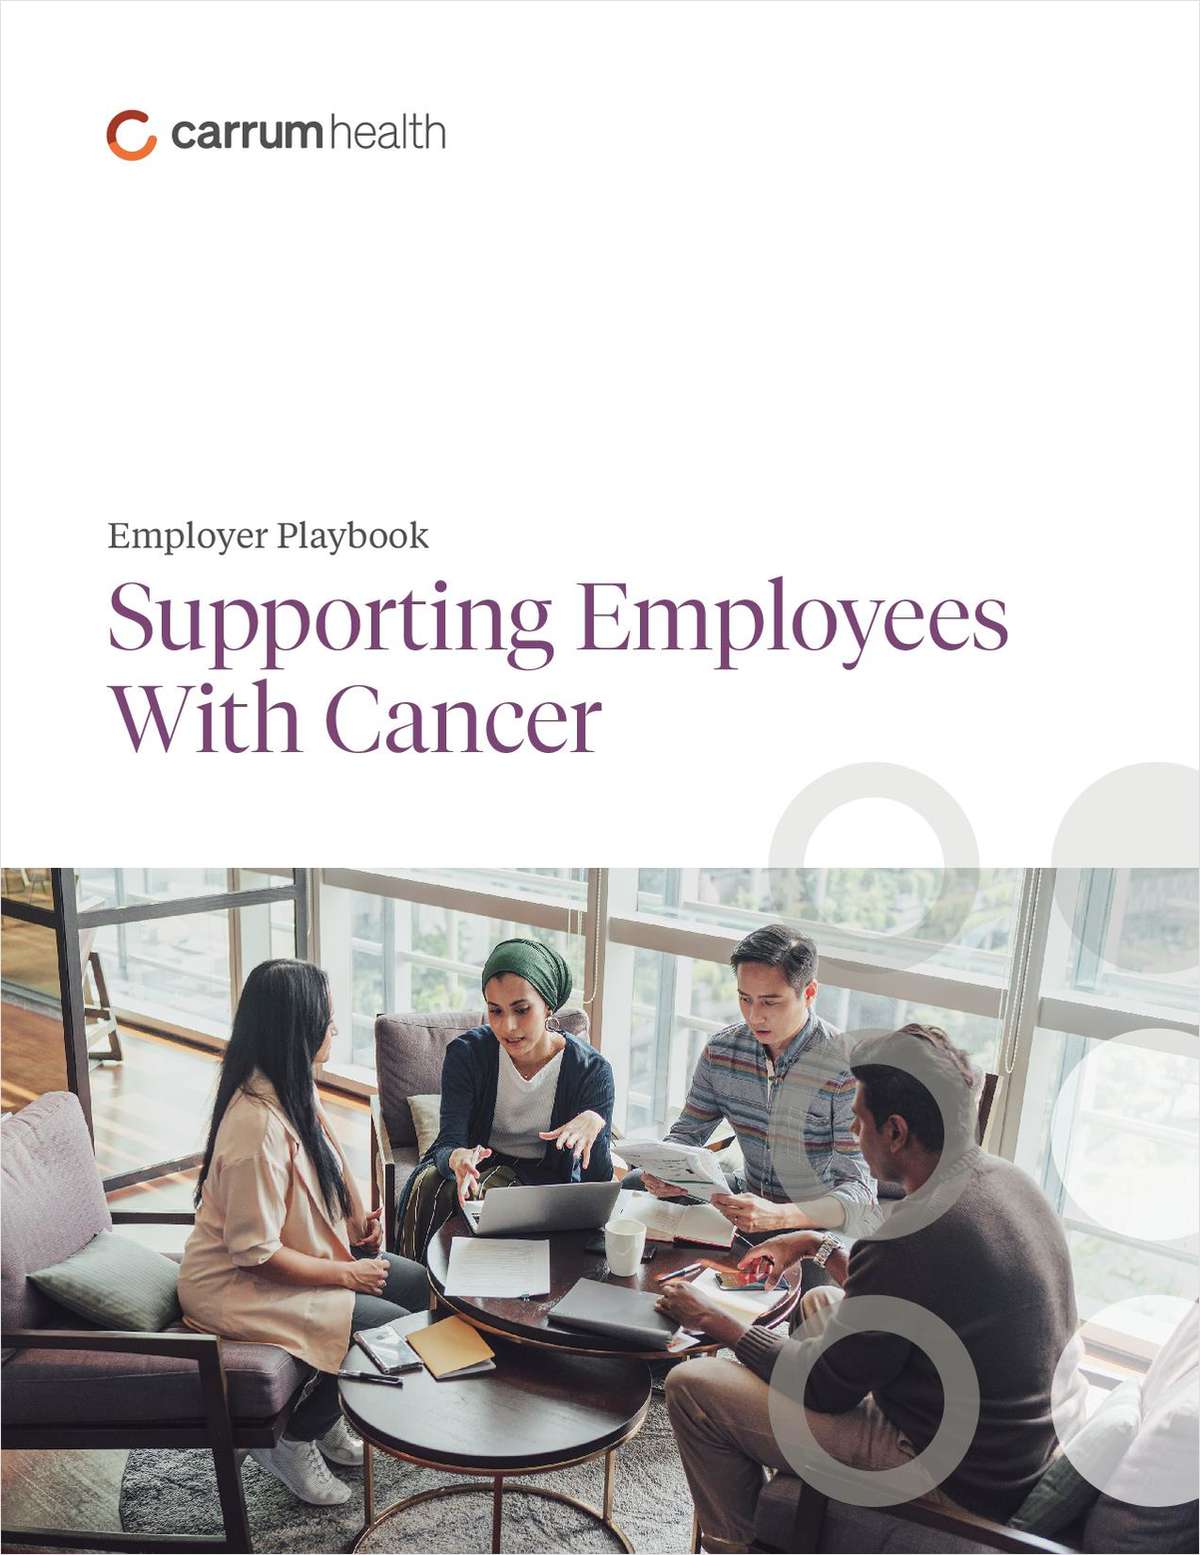 Employer Playbook: Supporting Employees With Cancer